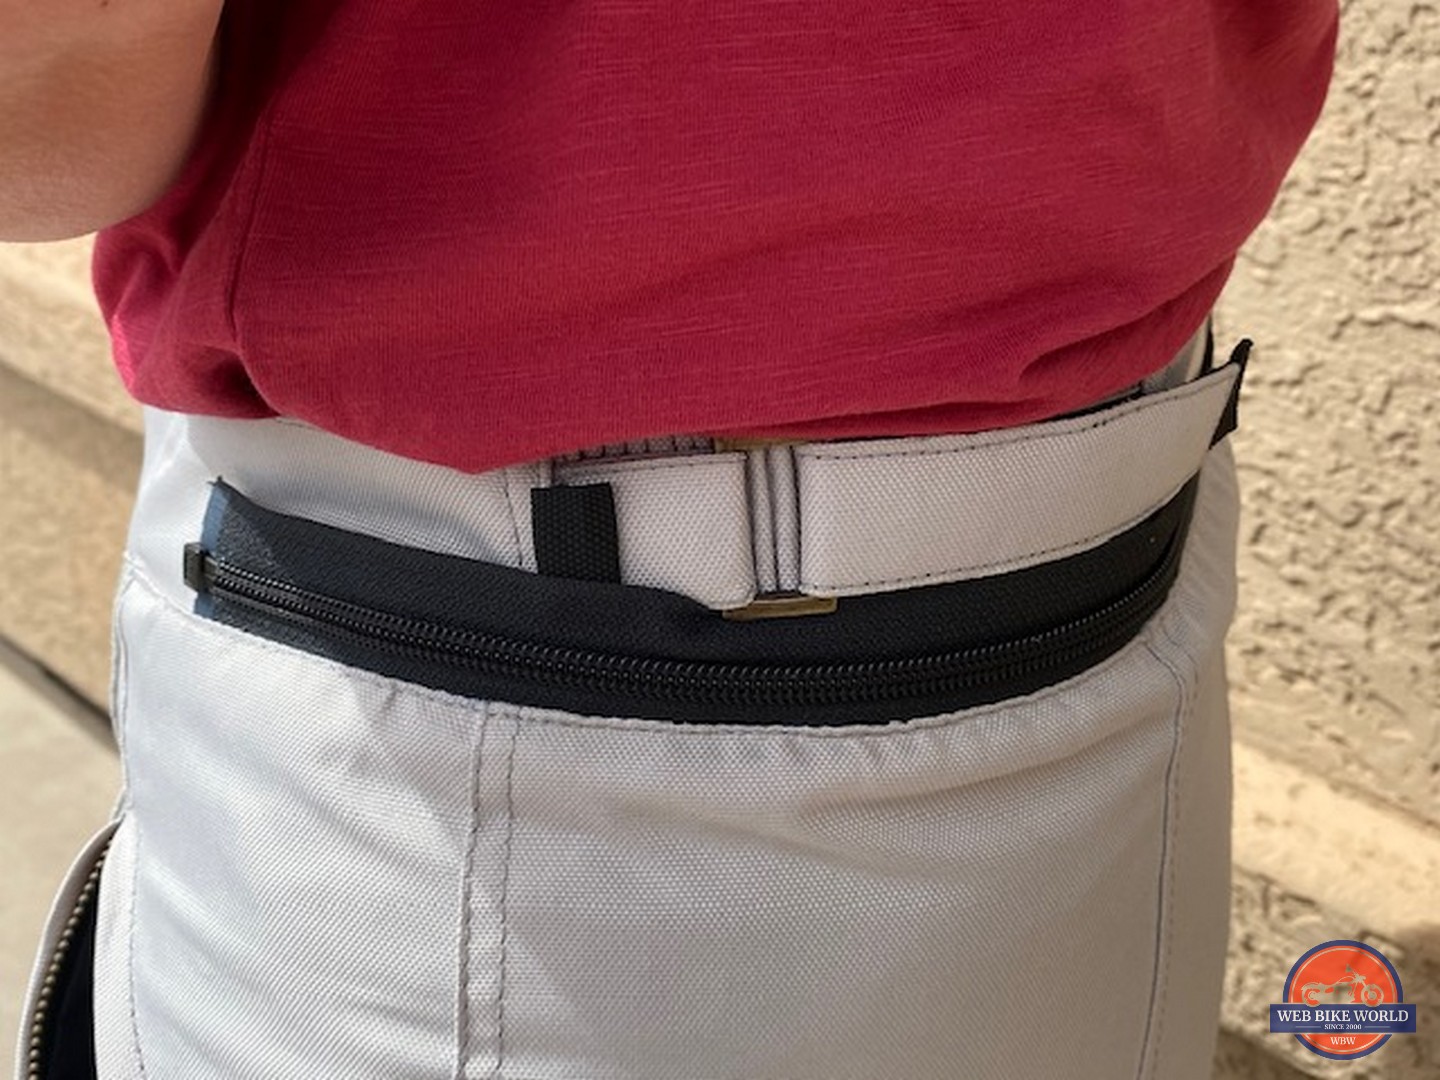 Falcon pants waistband expanded to provide additional flexibility